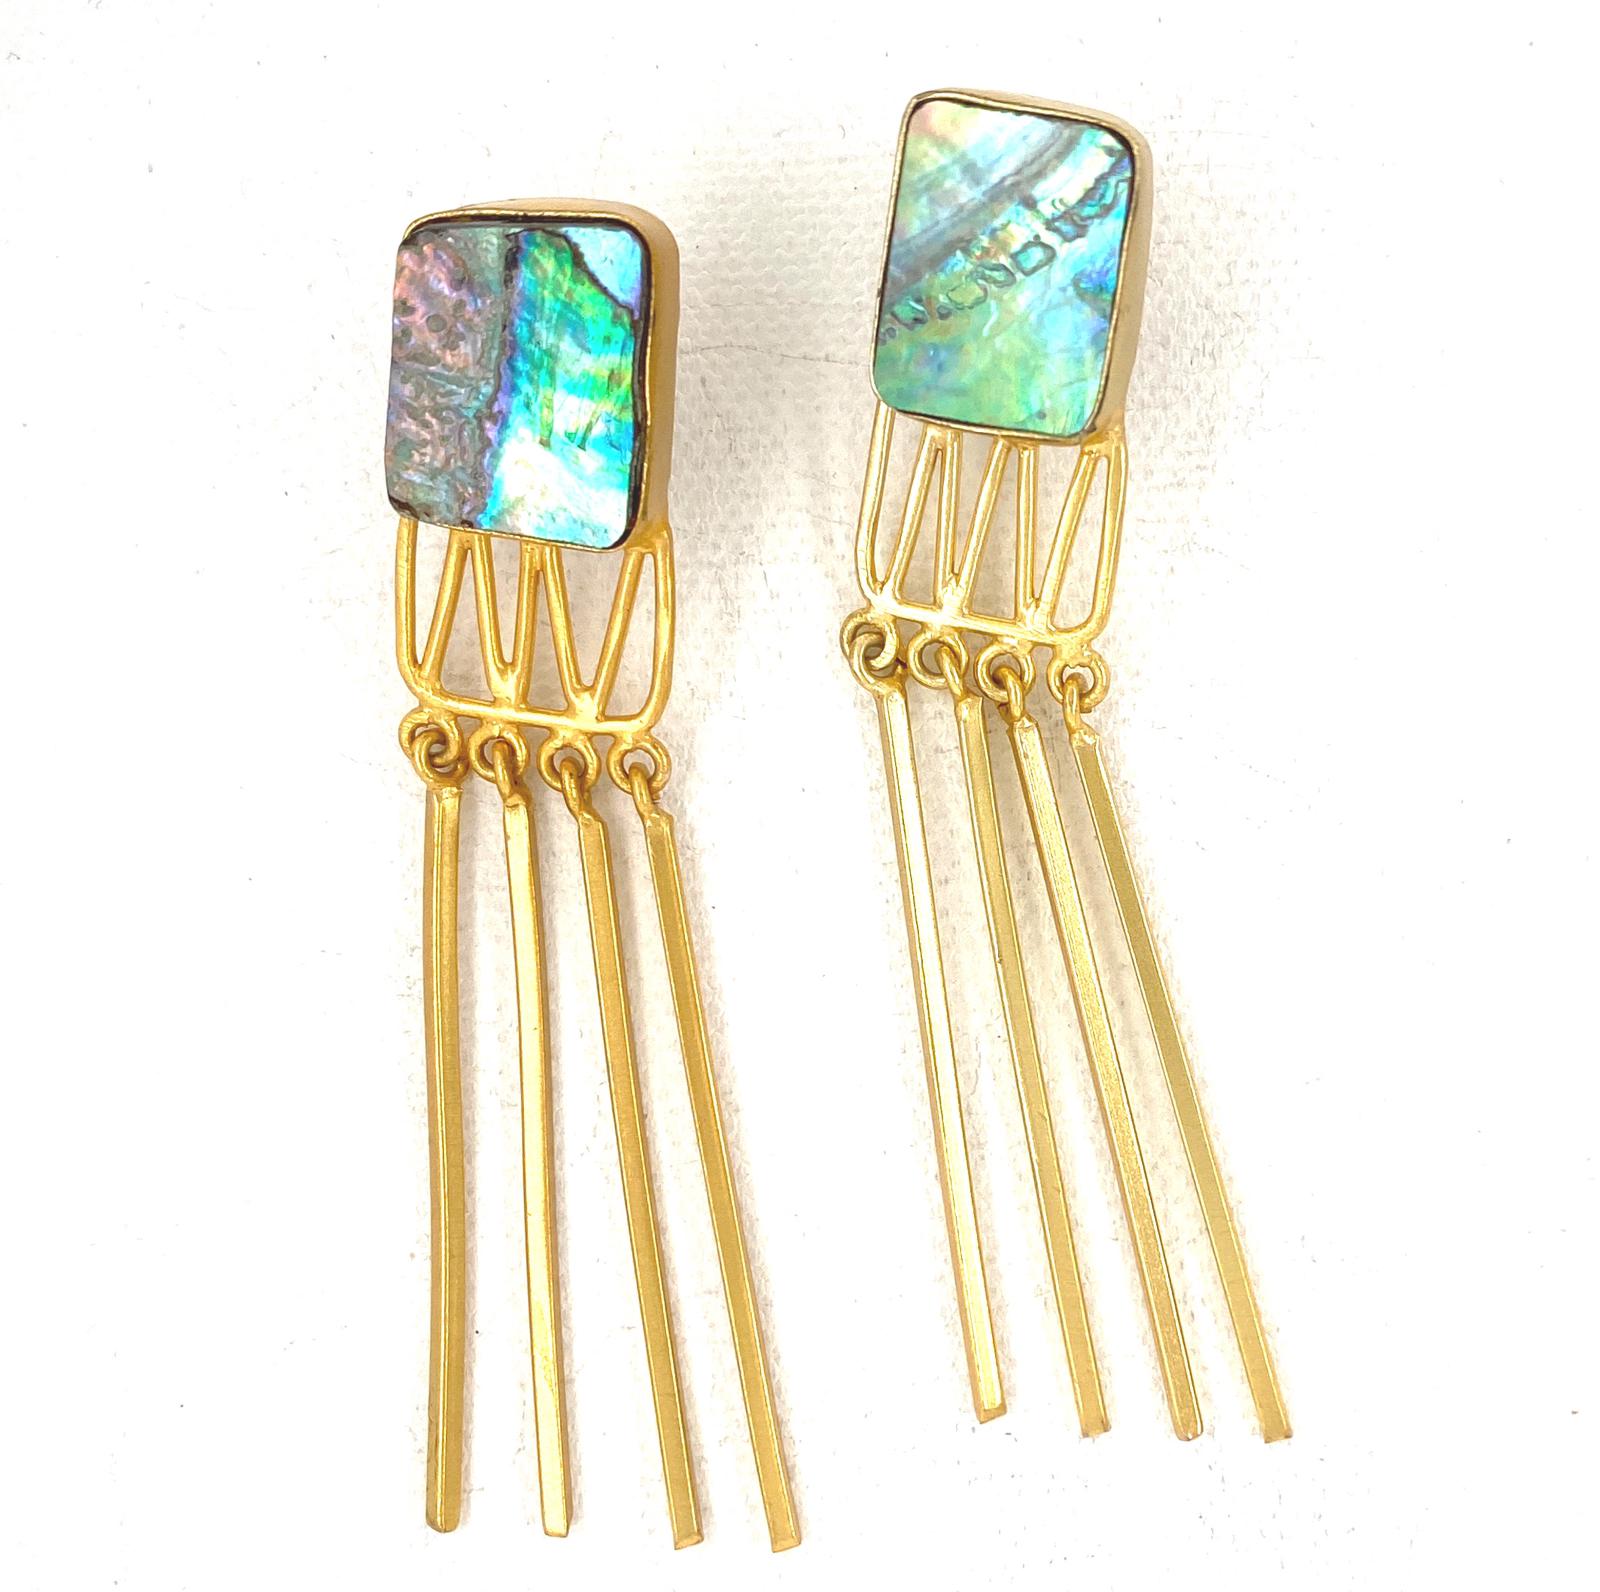 Abalone shell earrings with long gold tales